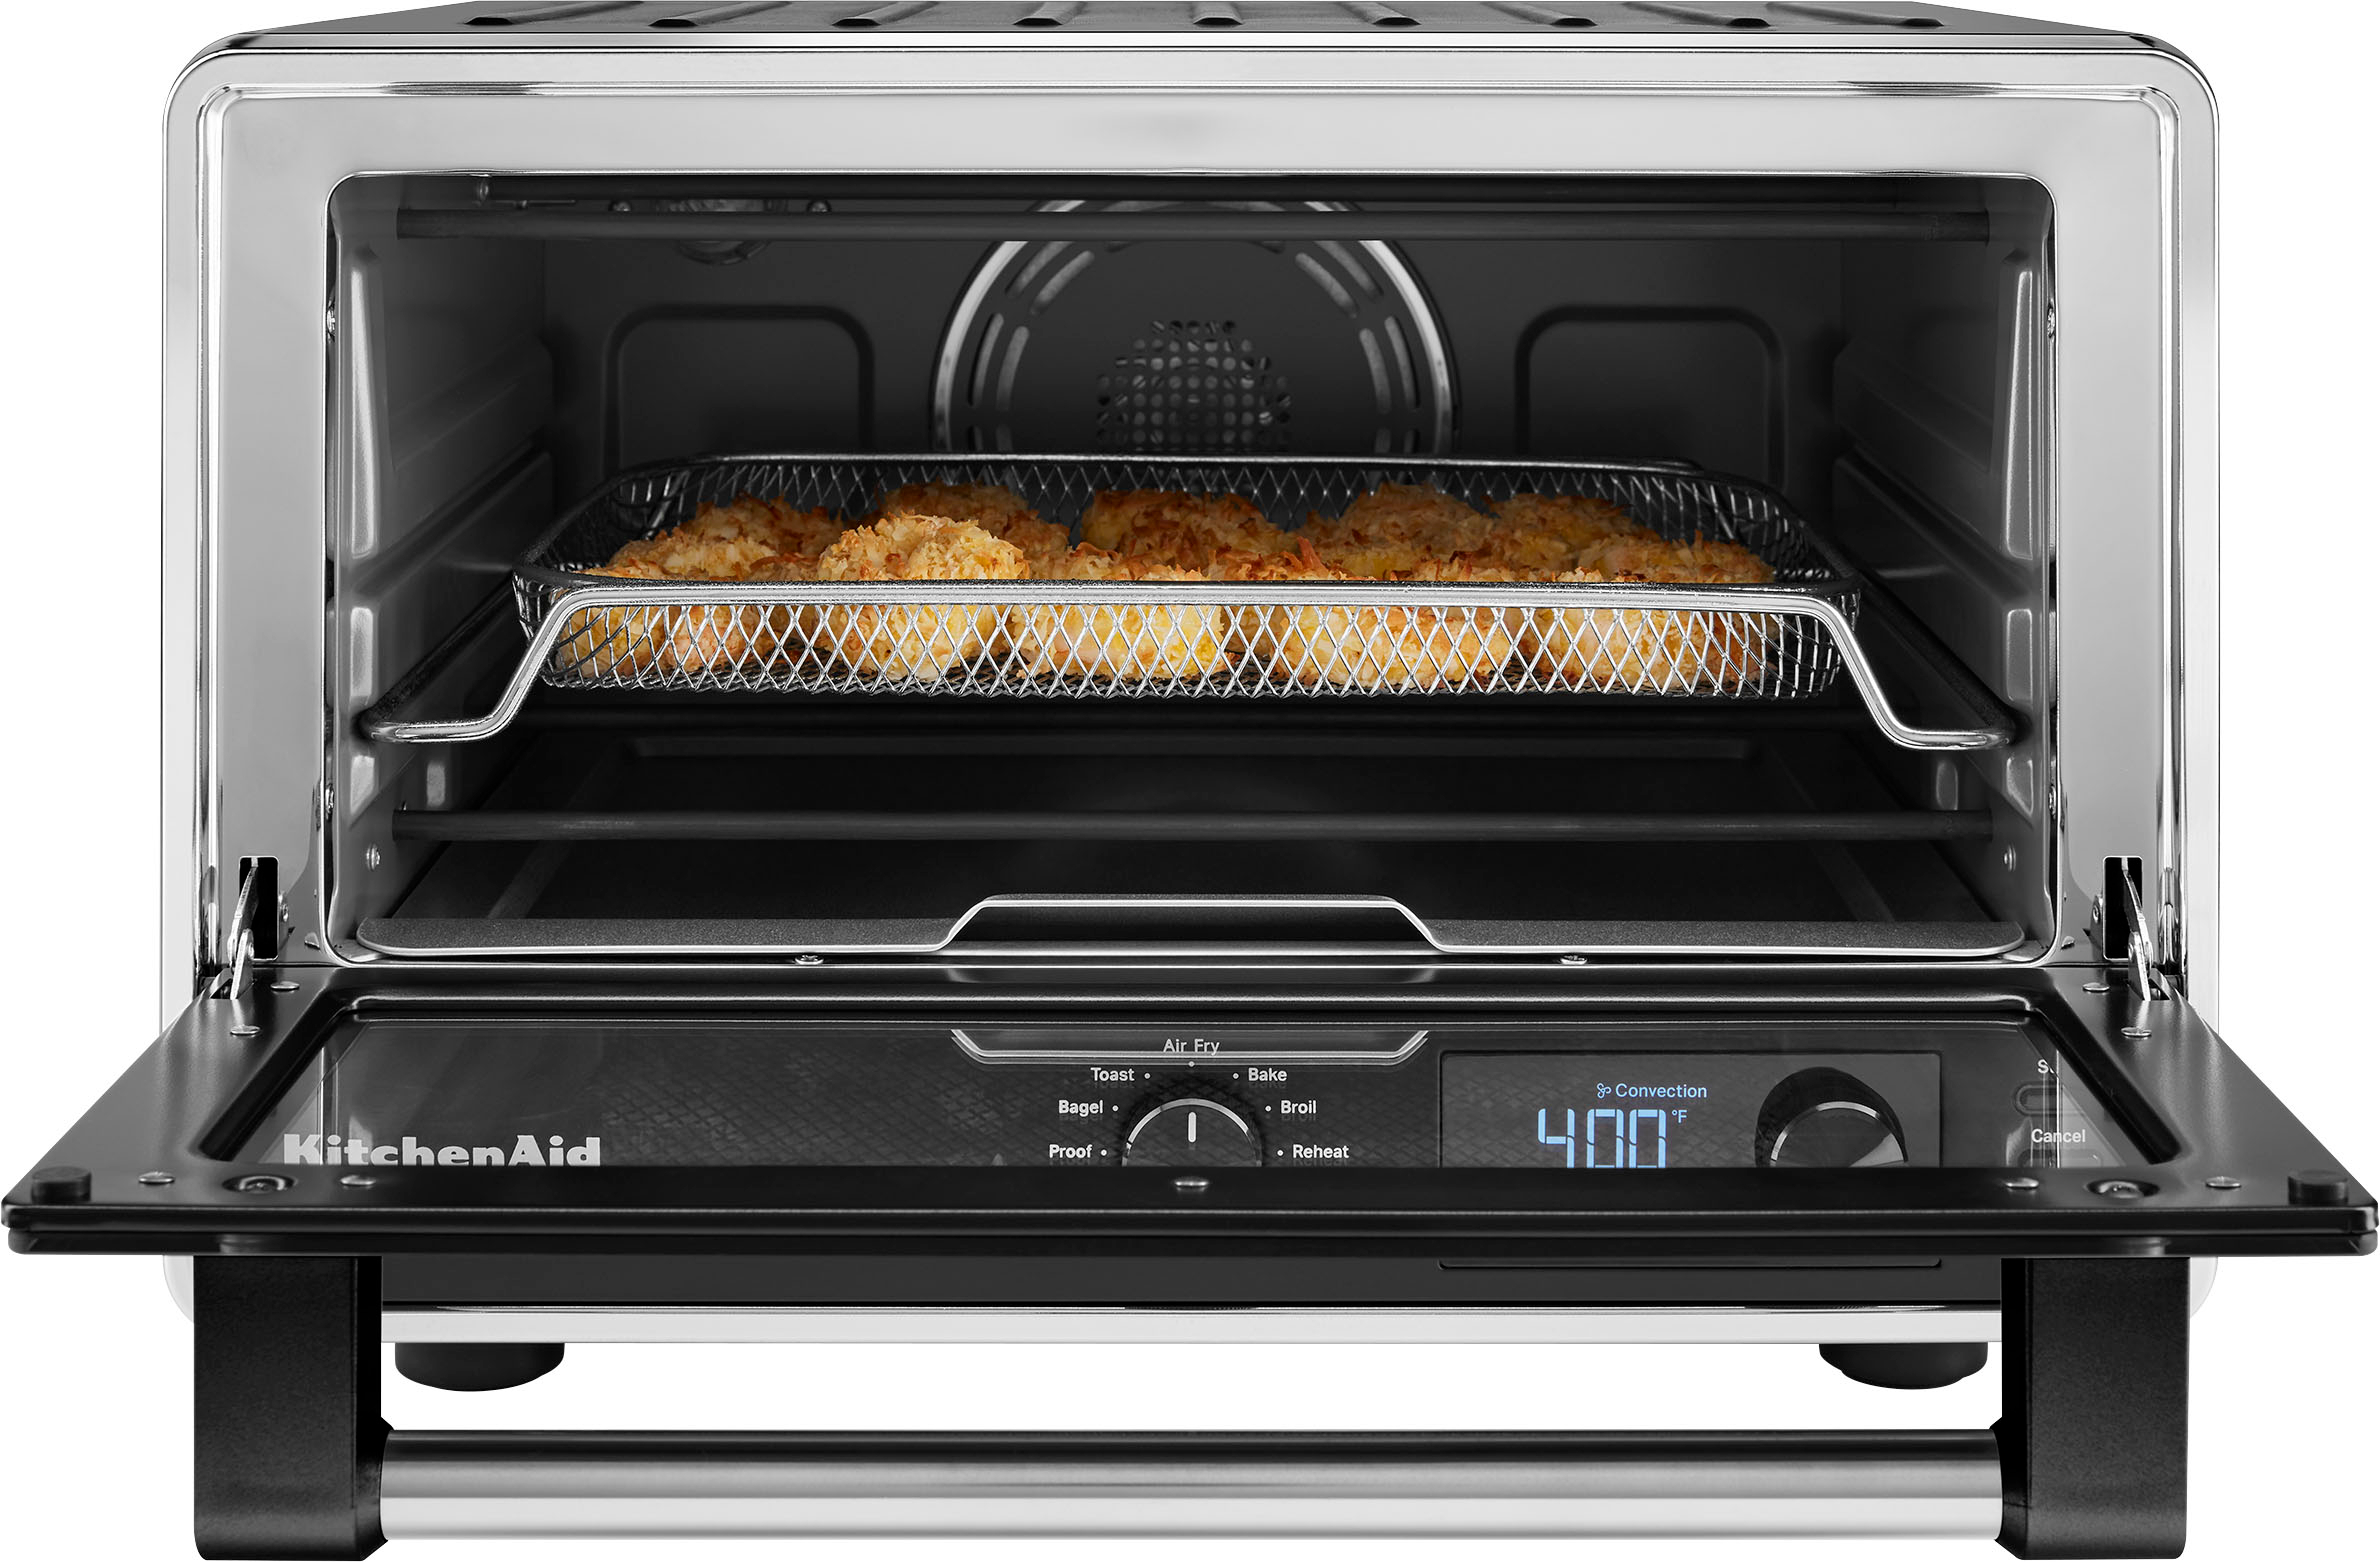 Black Air Fryer Oven, Countertop Toaster Oven with 3-Rack Levels and 4  mechinical knobs Mile-CYD0-Z2F7 - The Home Depot